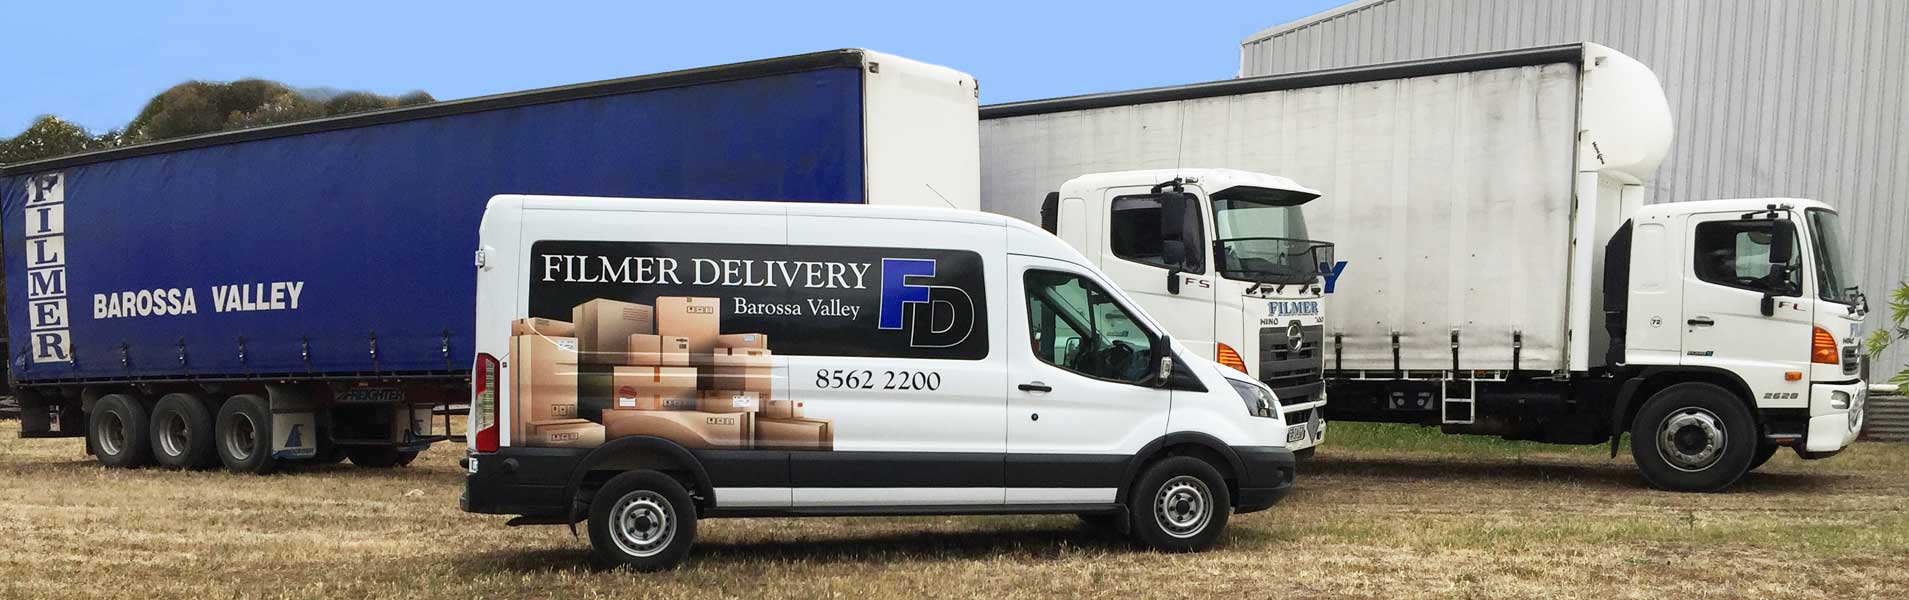 barossa valley freight transport delivery